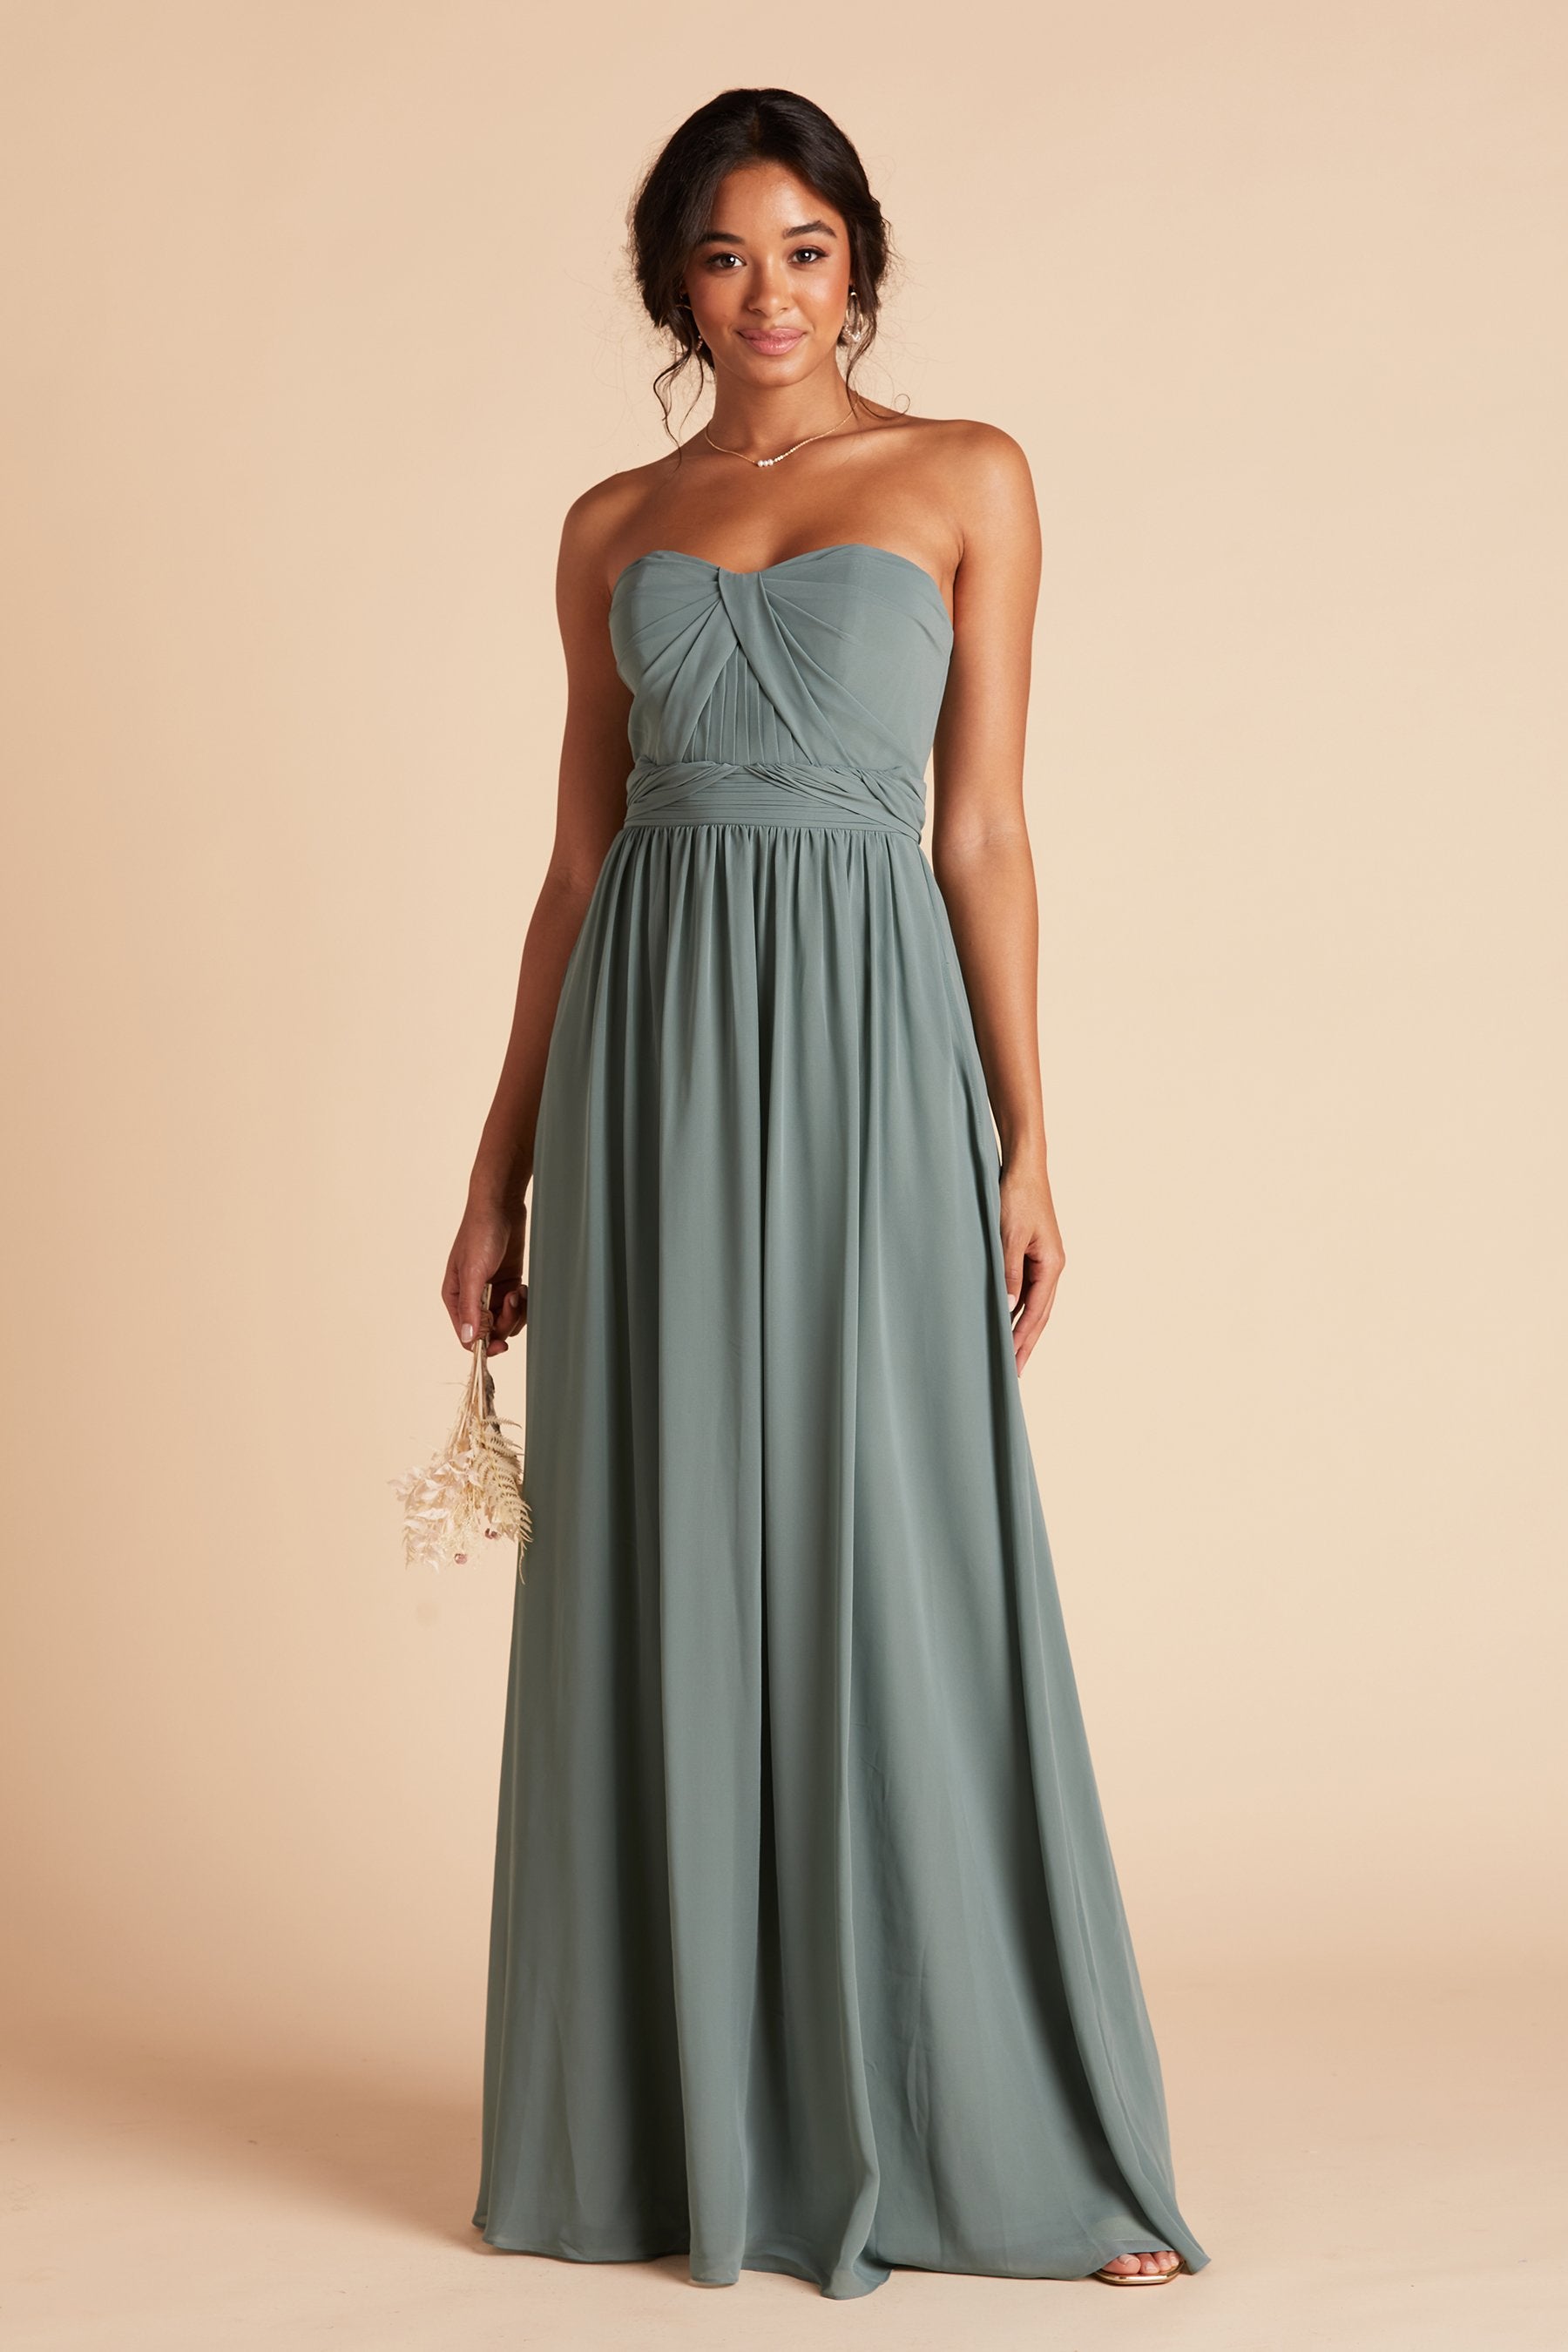 Front view of the Grace Convertible Dress in sea glass chiffon worn by a slender model with a medium skin tone. 